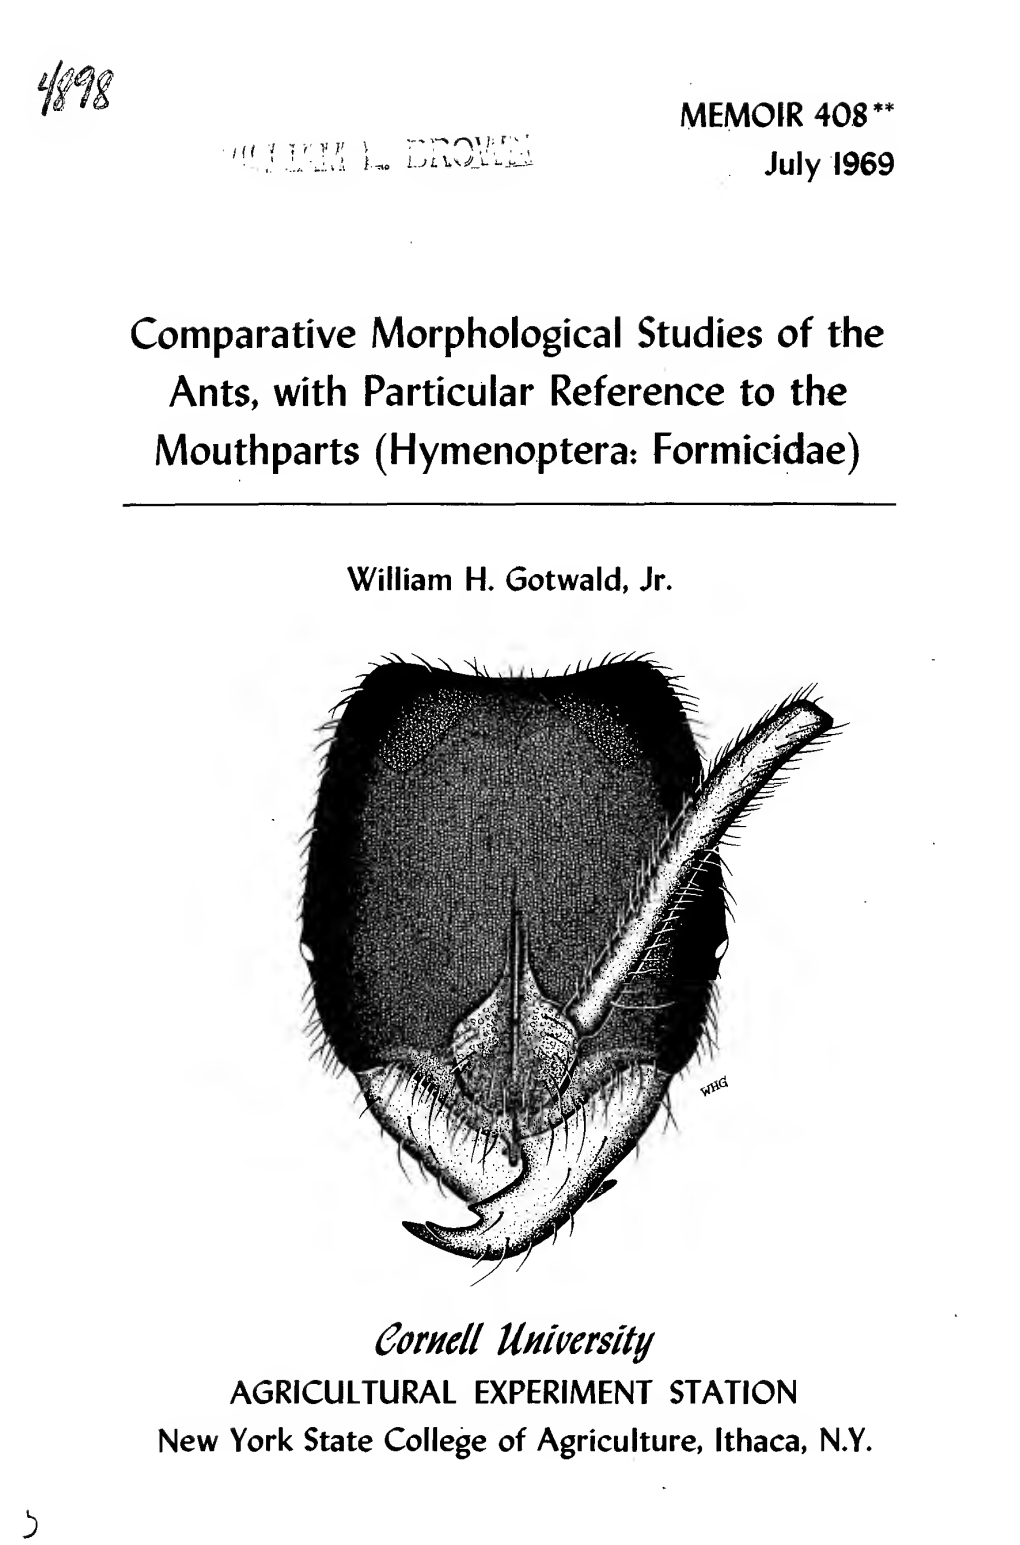 Comparative Morphological Studies of the Ants, with Particular Reference To